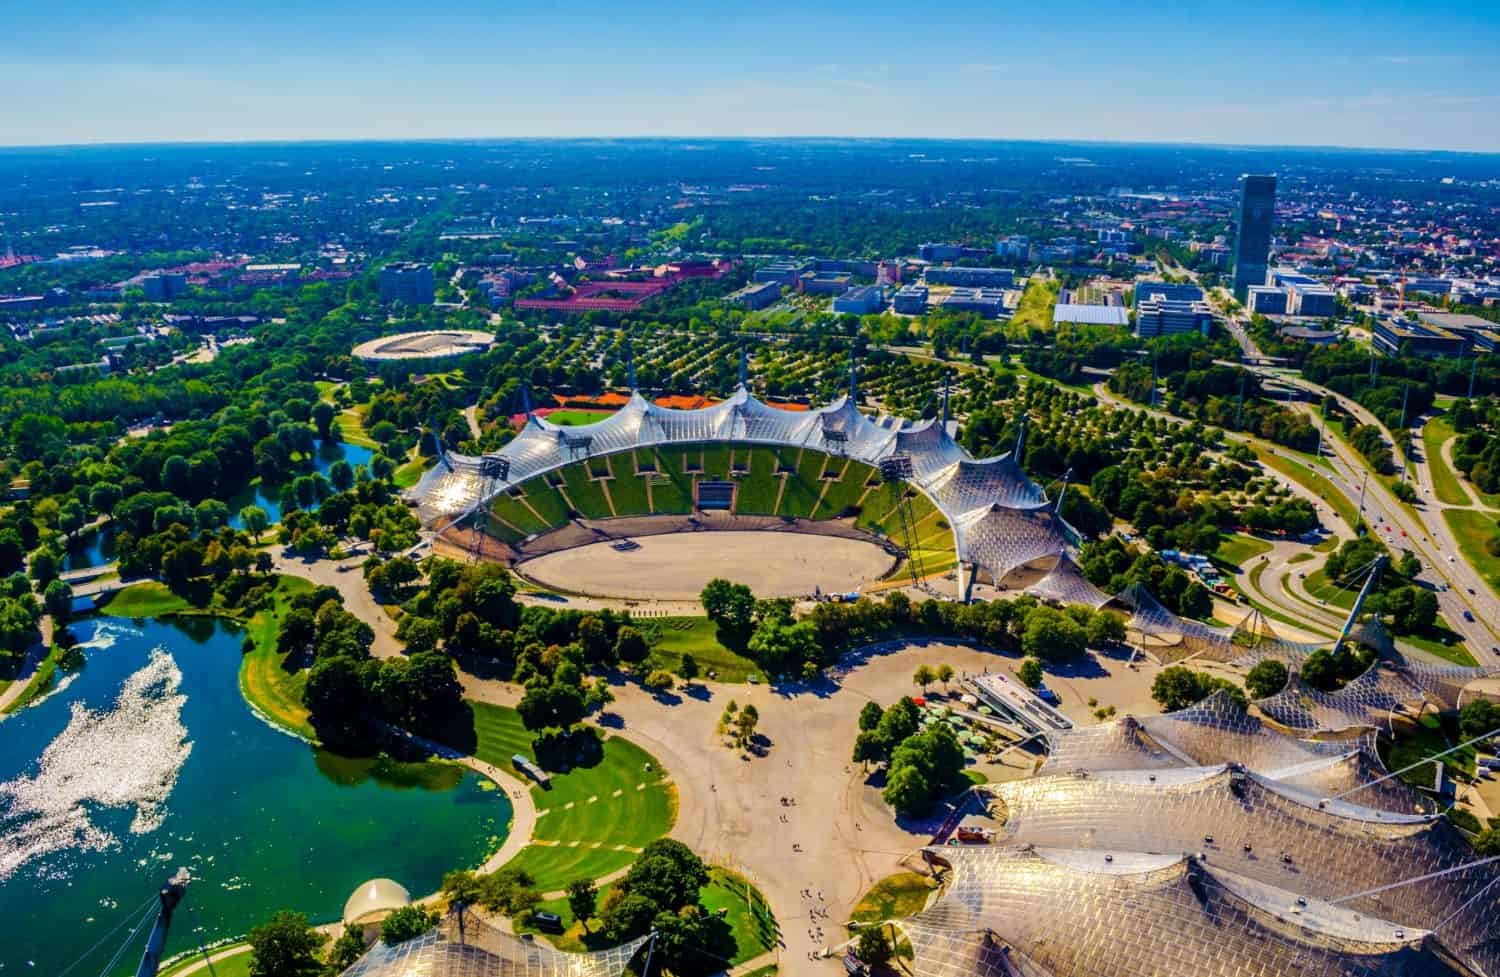 Aerial view of olympiapark in german city munich which hosted olympic games at 1972.